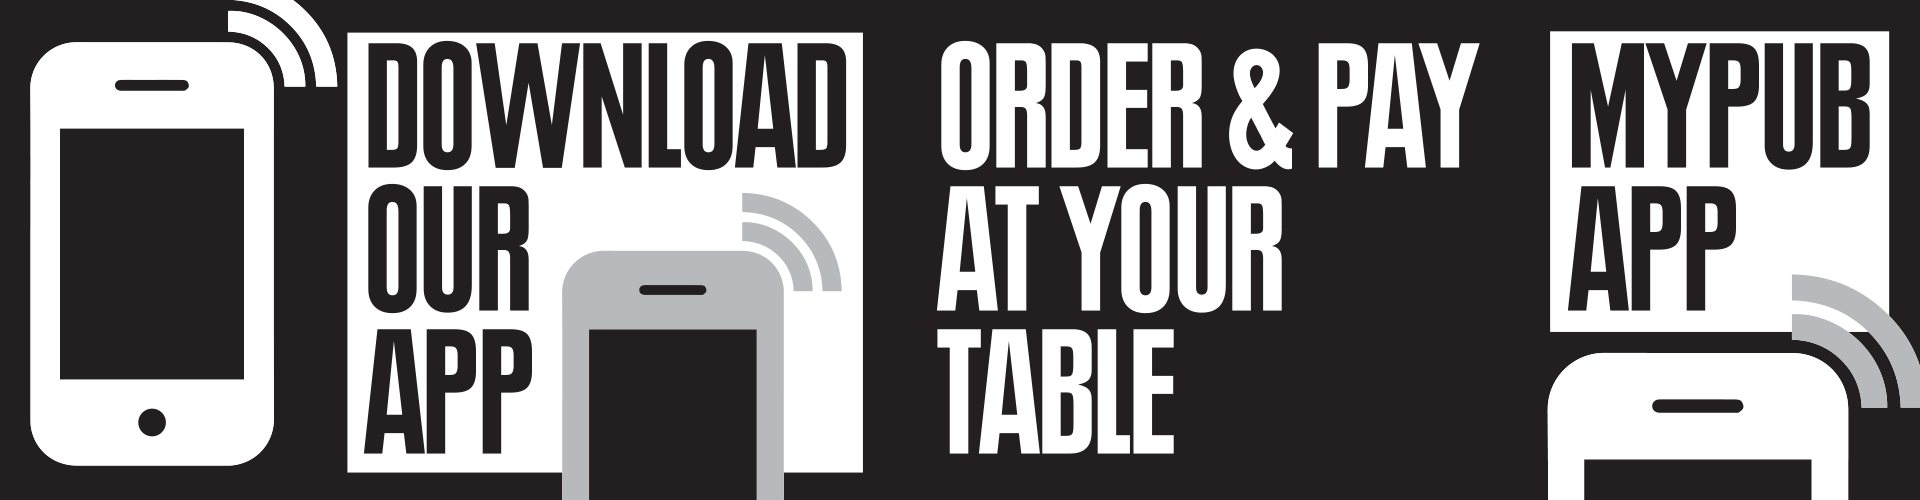 Download our app, order and pay at your table. My Pub App.